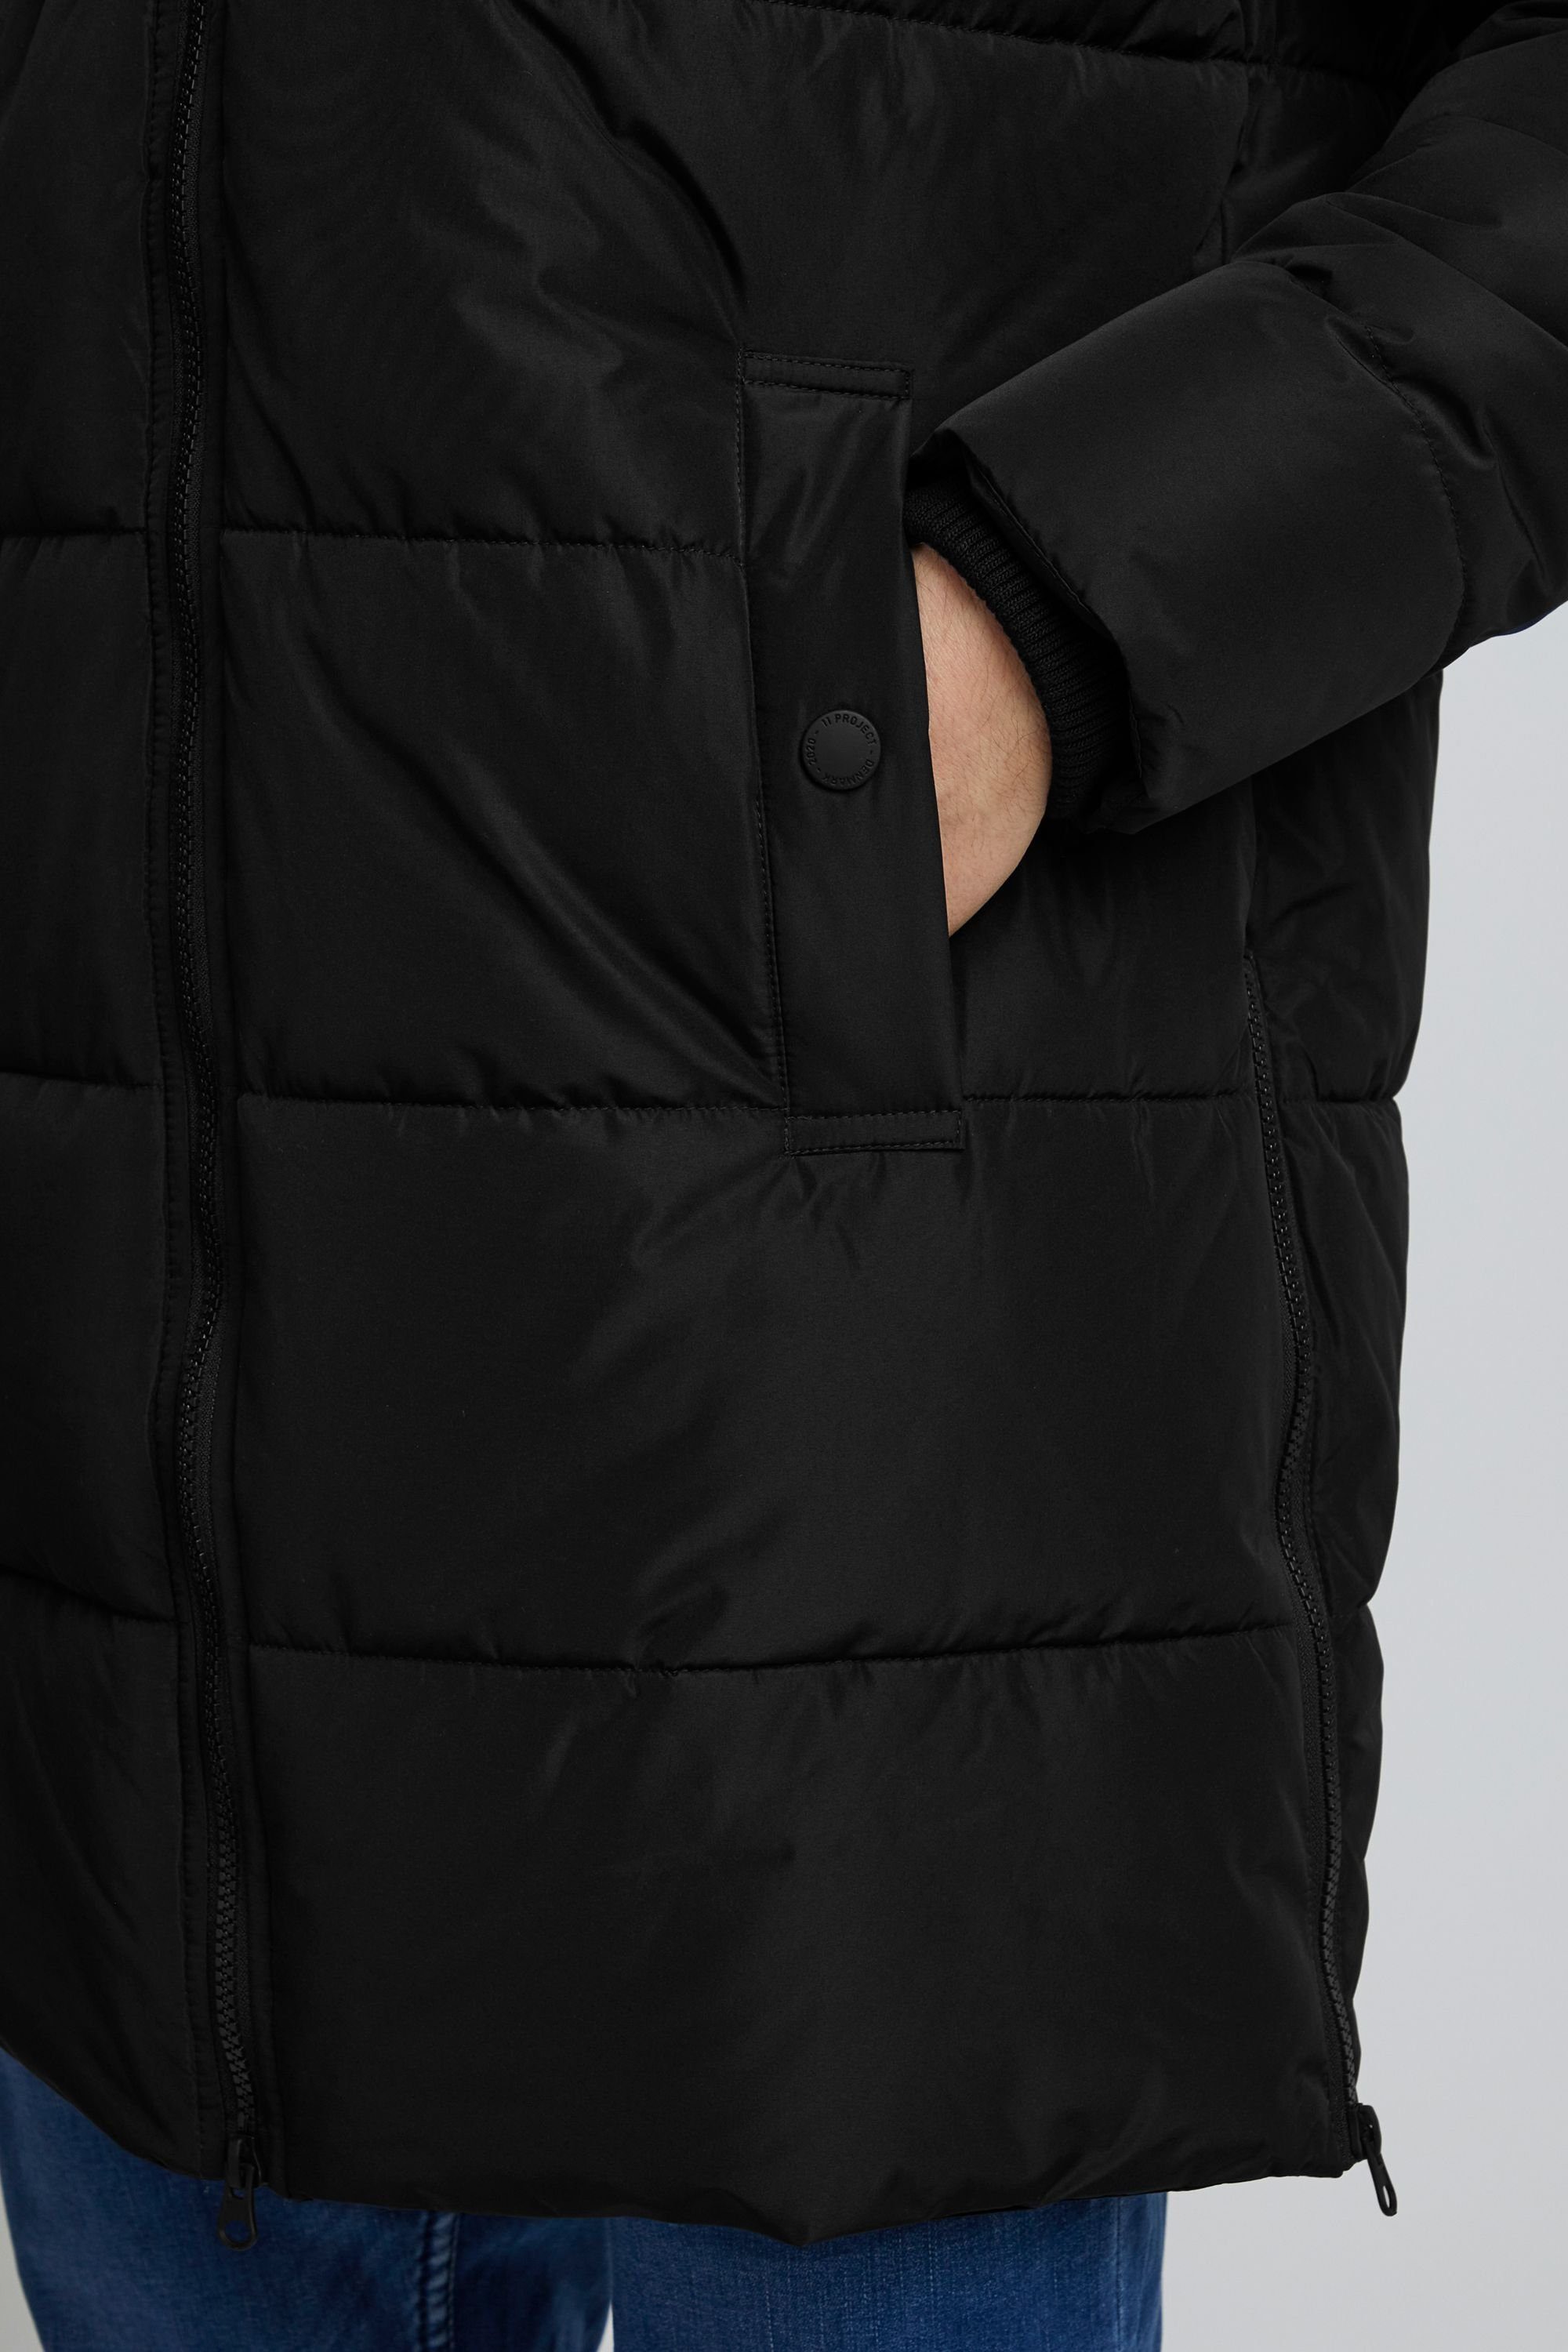 Parka Black 11 11 Parka Tibor Project Project Long quilted